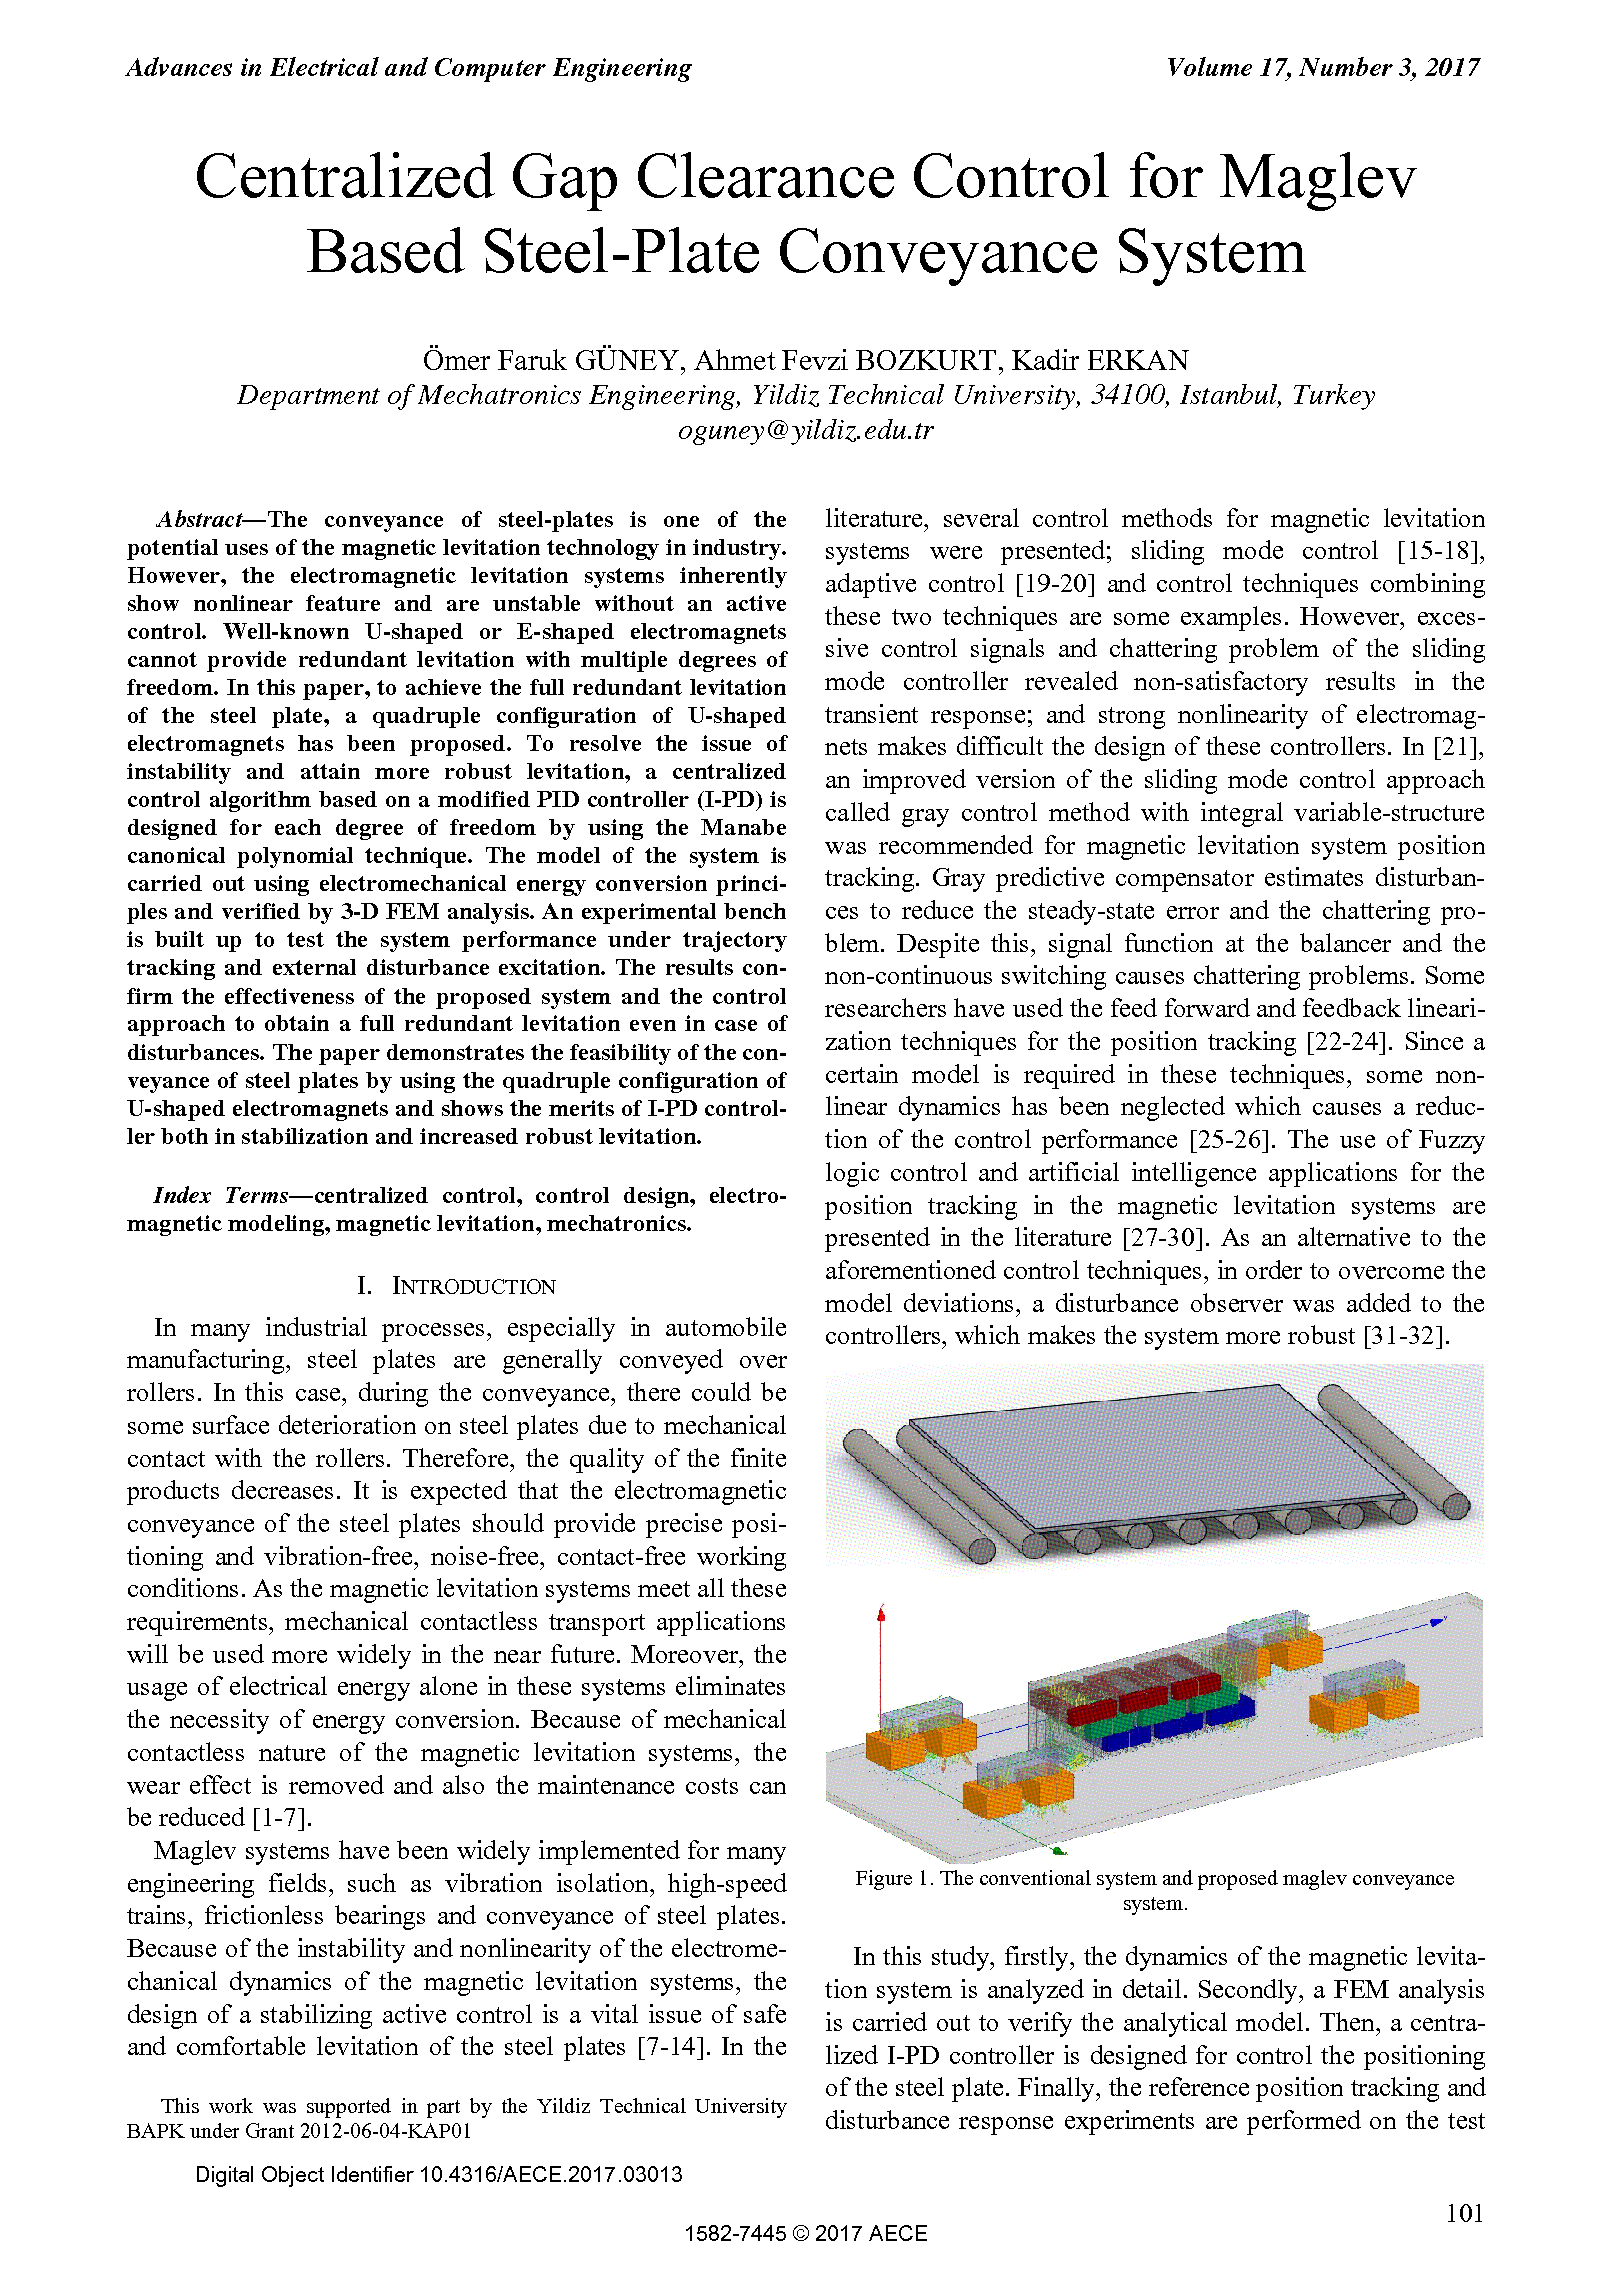 PDF Quickview for paper with DOI:10.4316/AECE.2017.03013